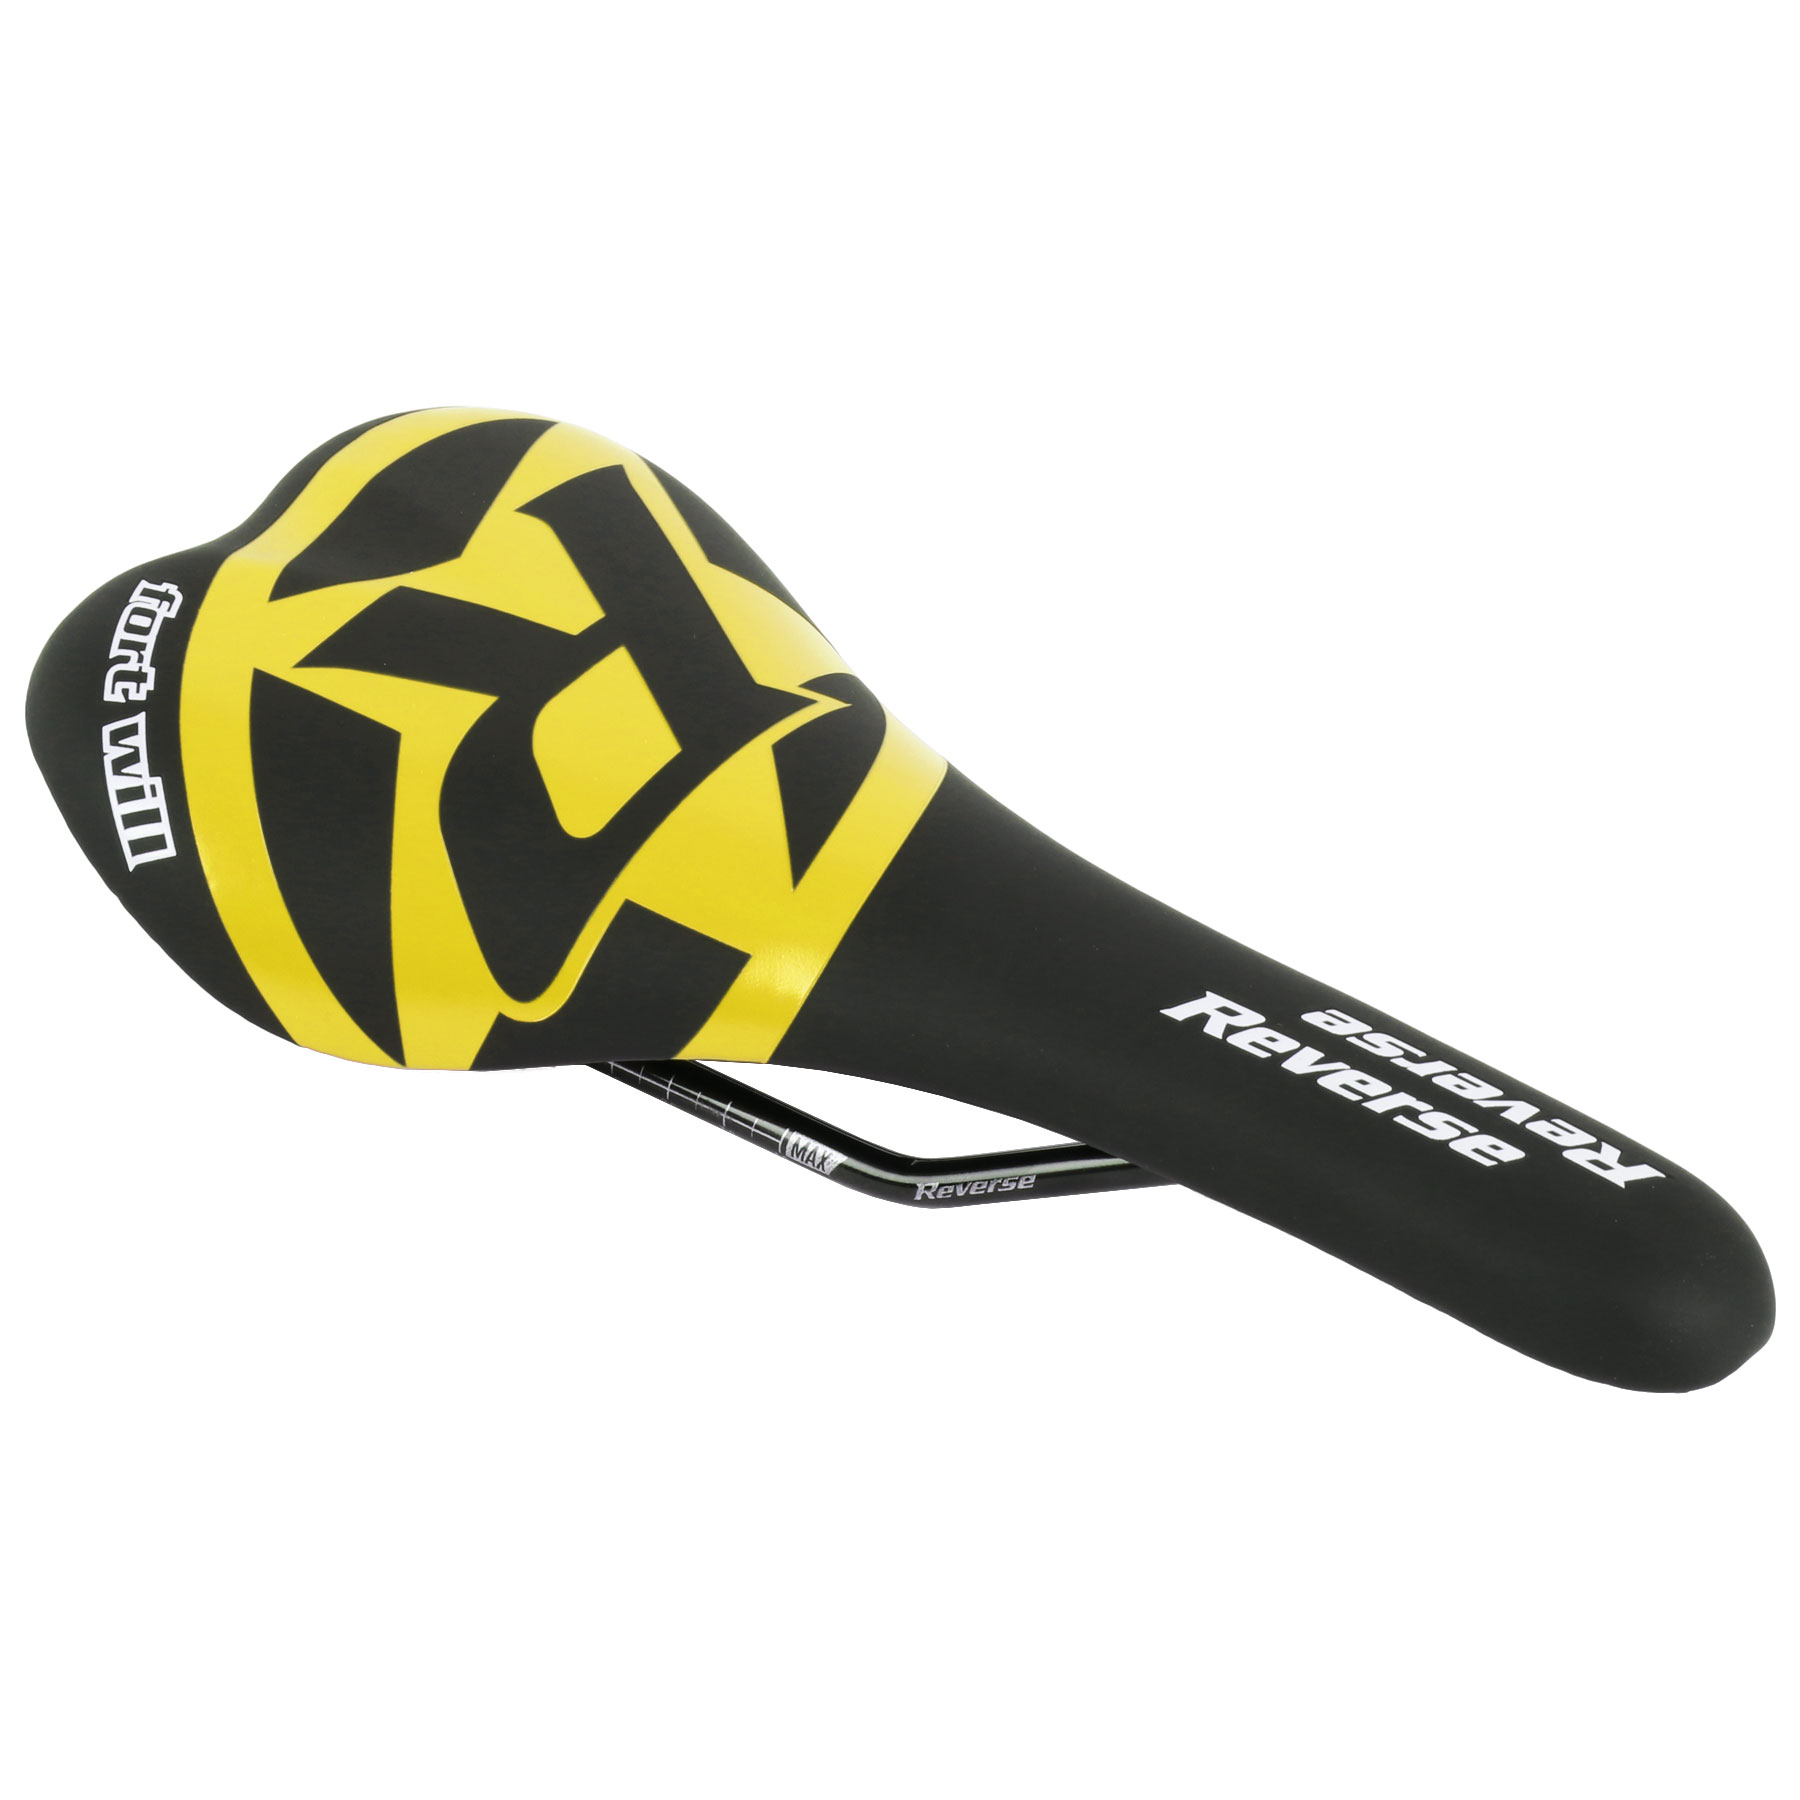 Productfoto van Reverse Components Fort Will Saddle CrMo Style - black / yellow